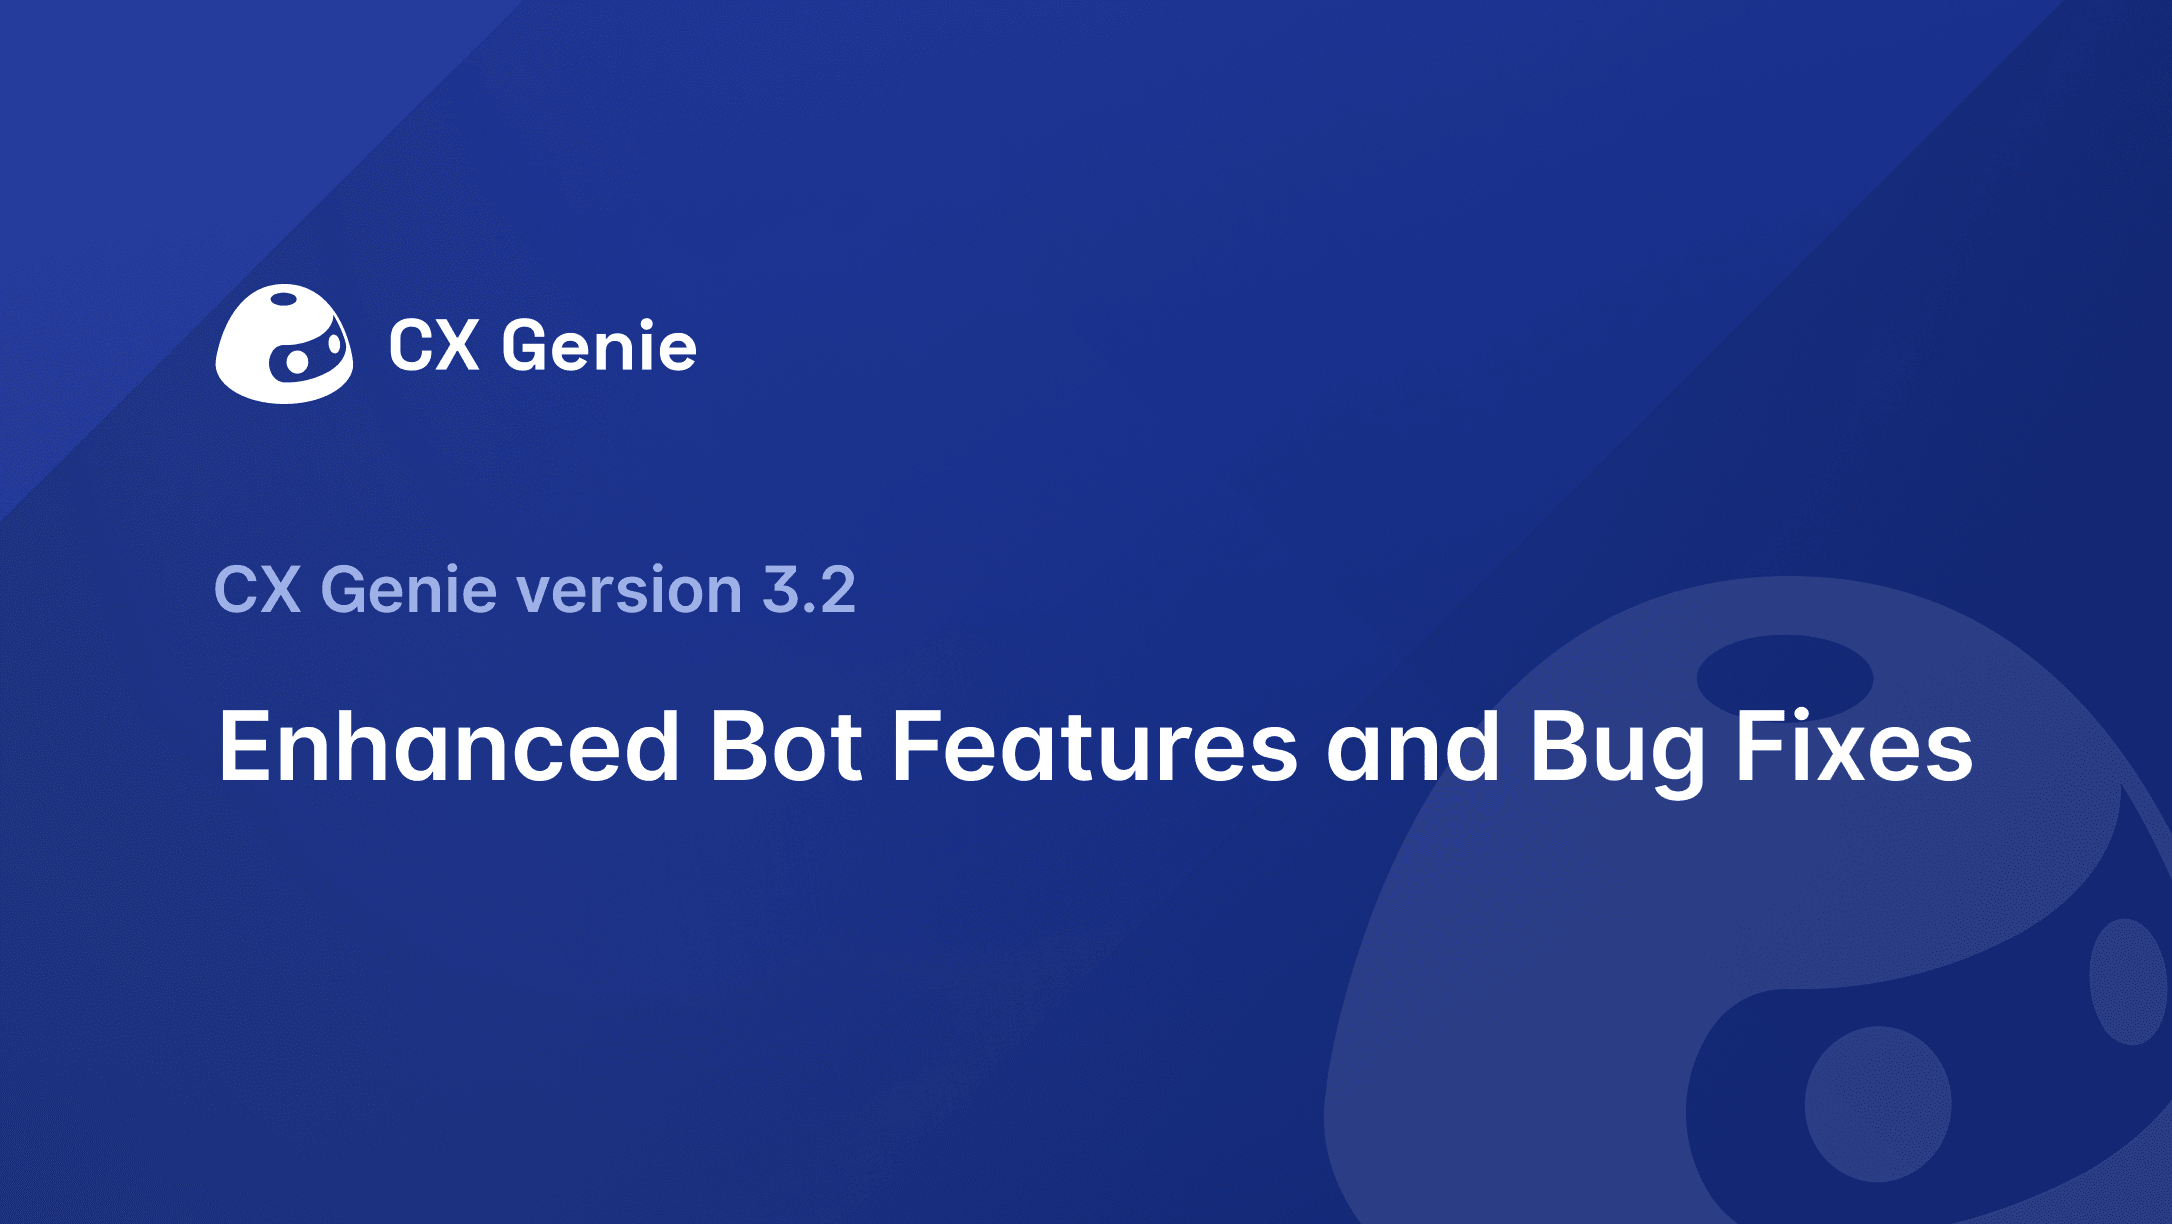 CX Genie Version 3.2: Enhanced Bot Features and Bug Fixes